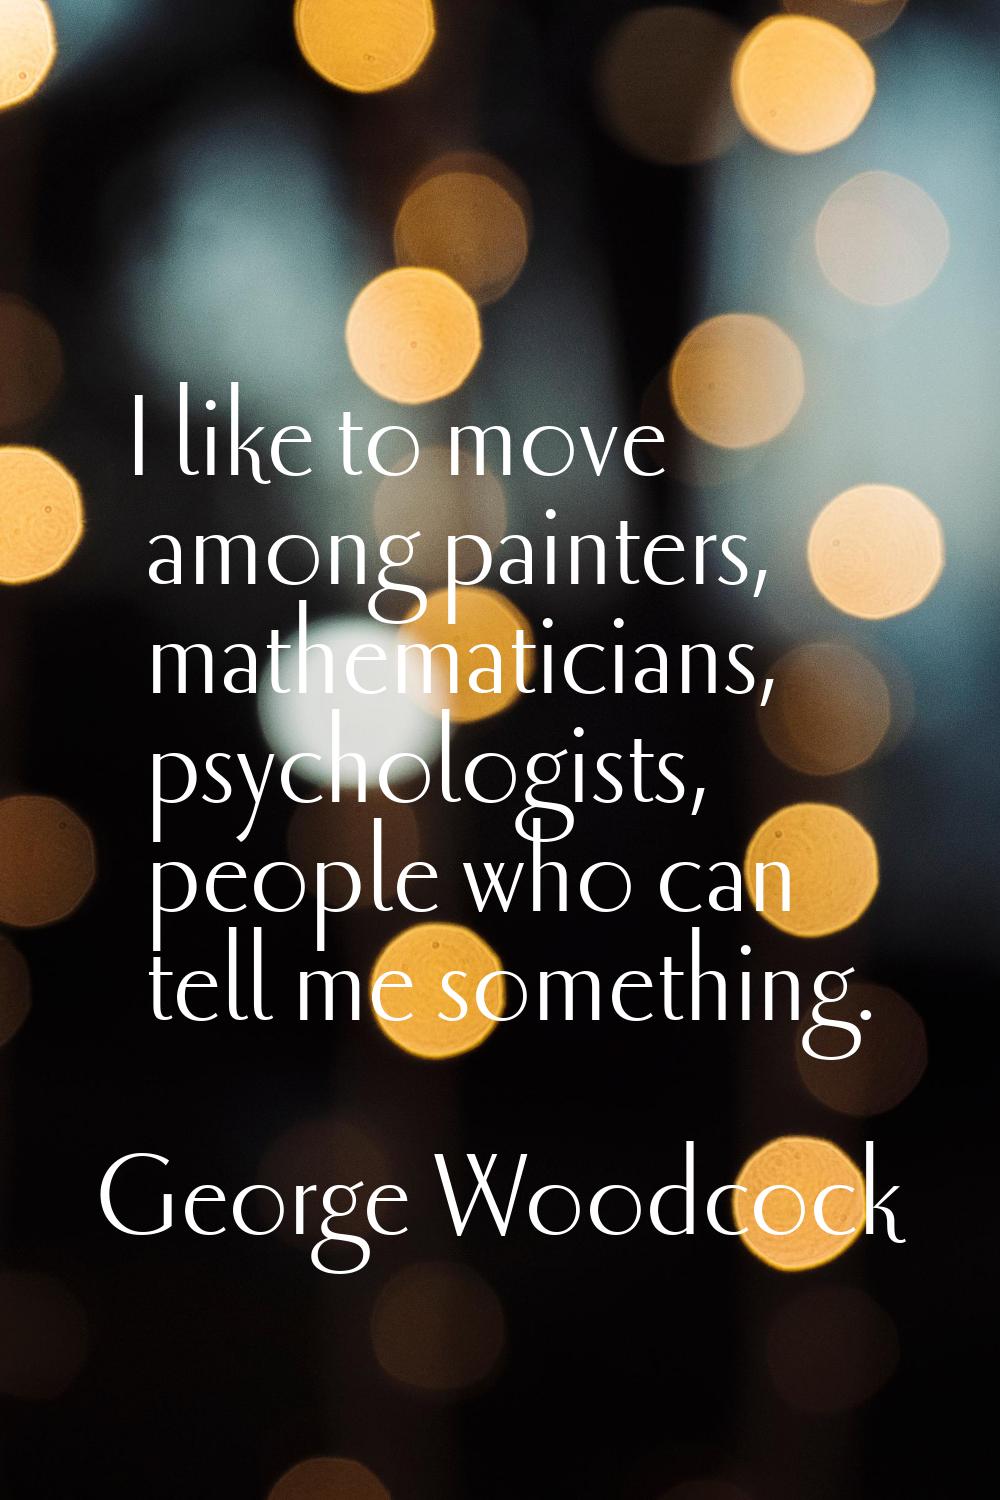 I like to move among painters, mathematicians, psychologists, people who can tell me something.